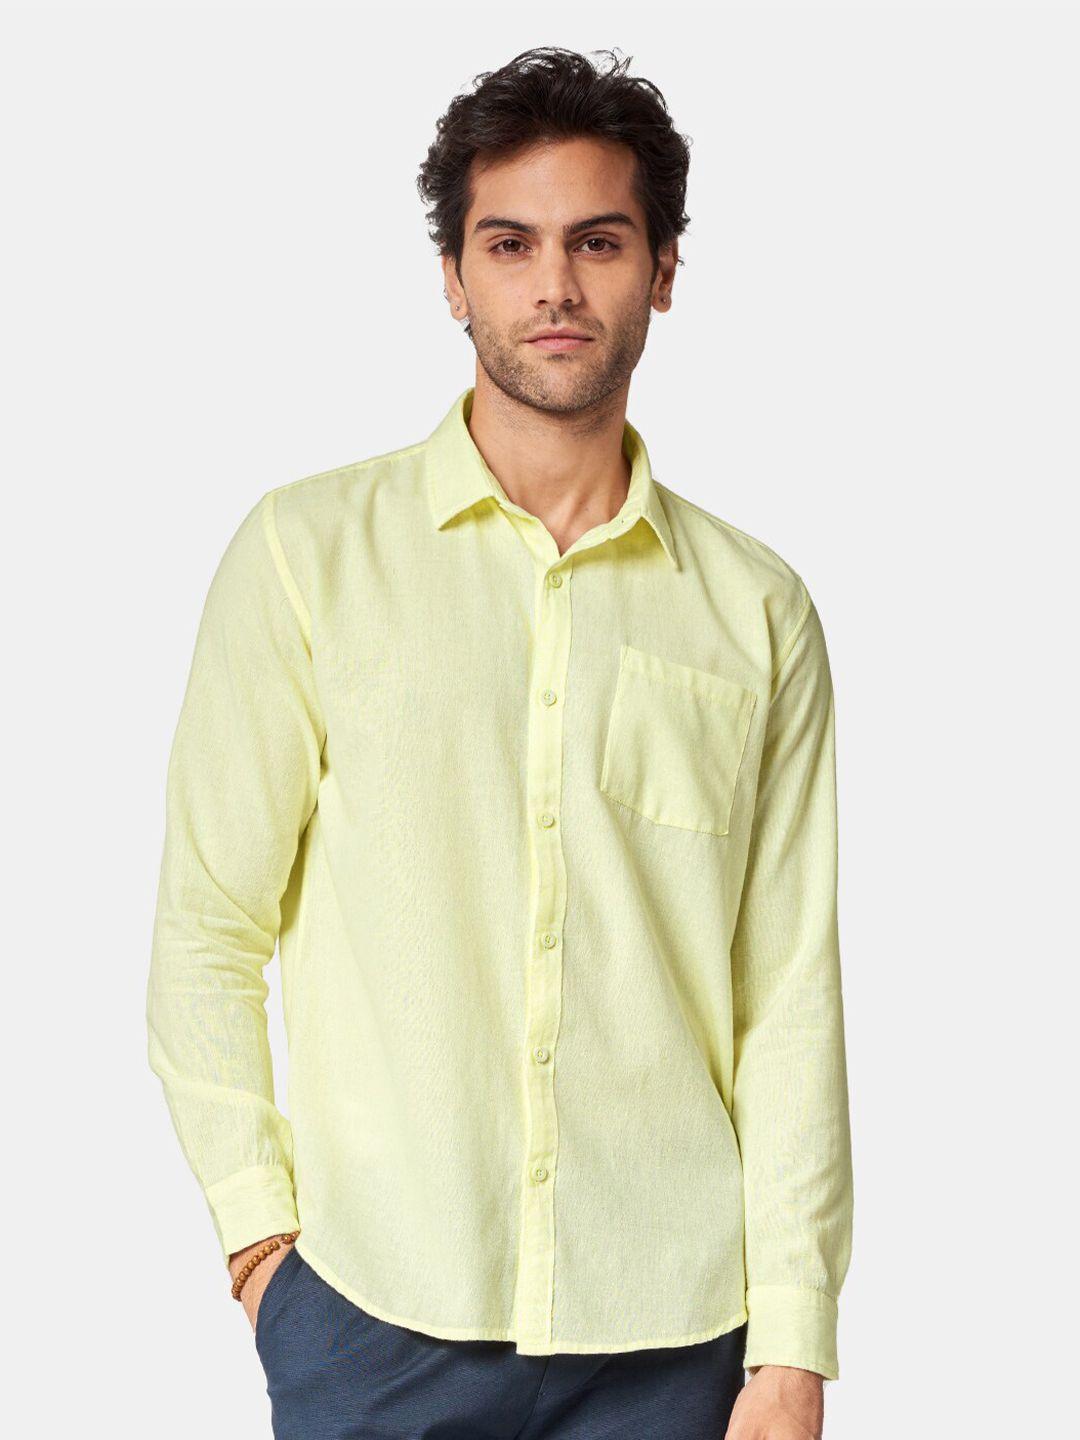 the-souled-store-men-regular-fit-solid-cotton-casual-shirt